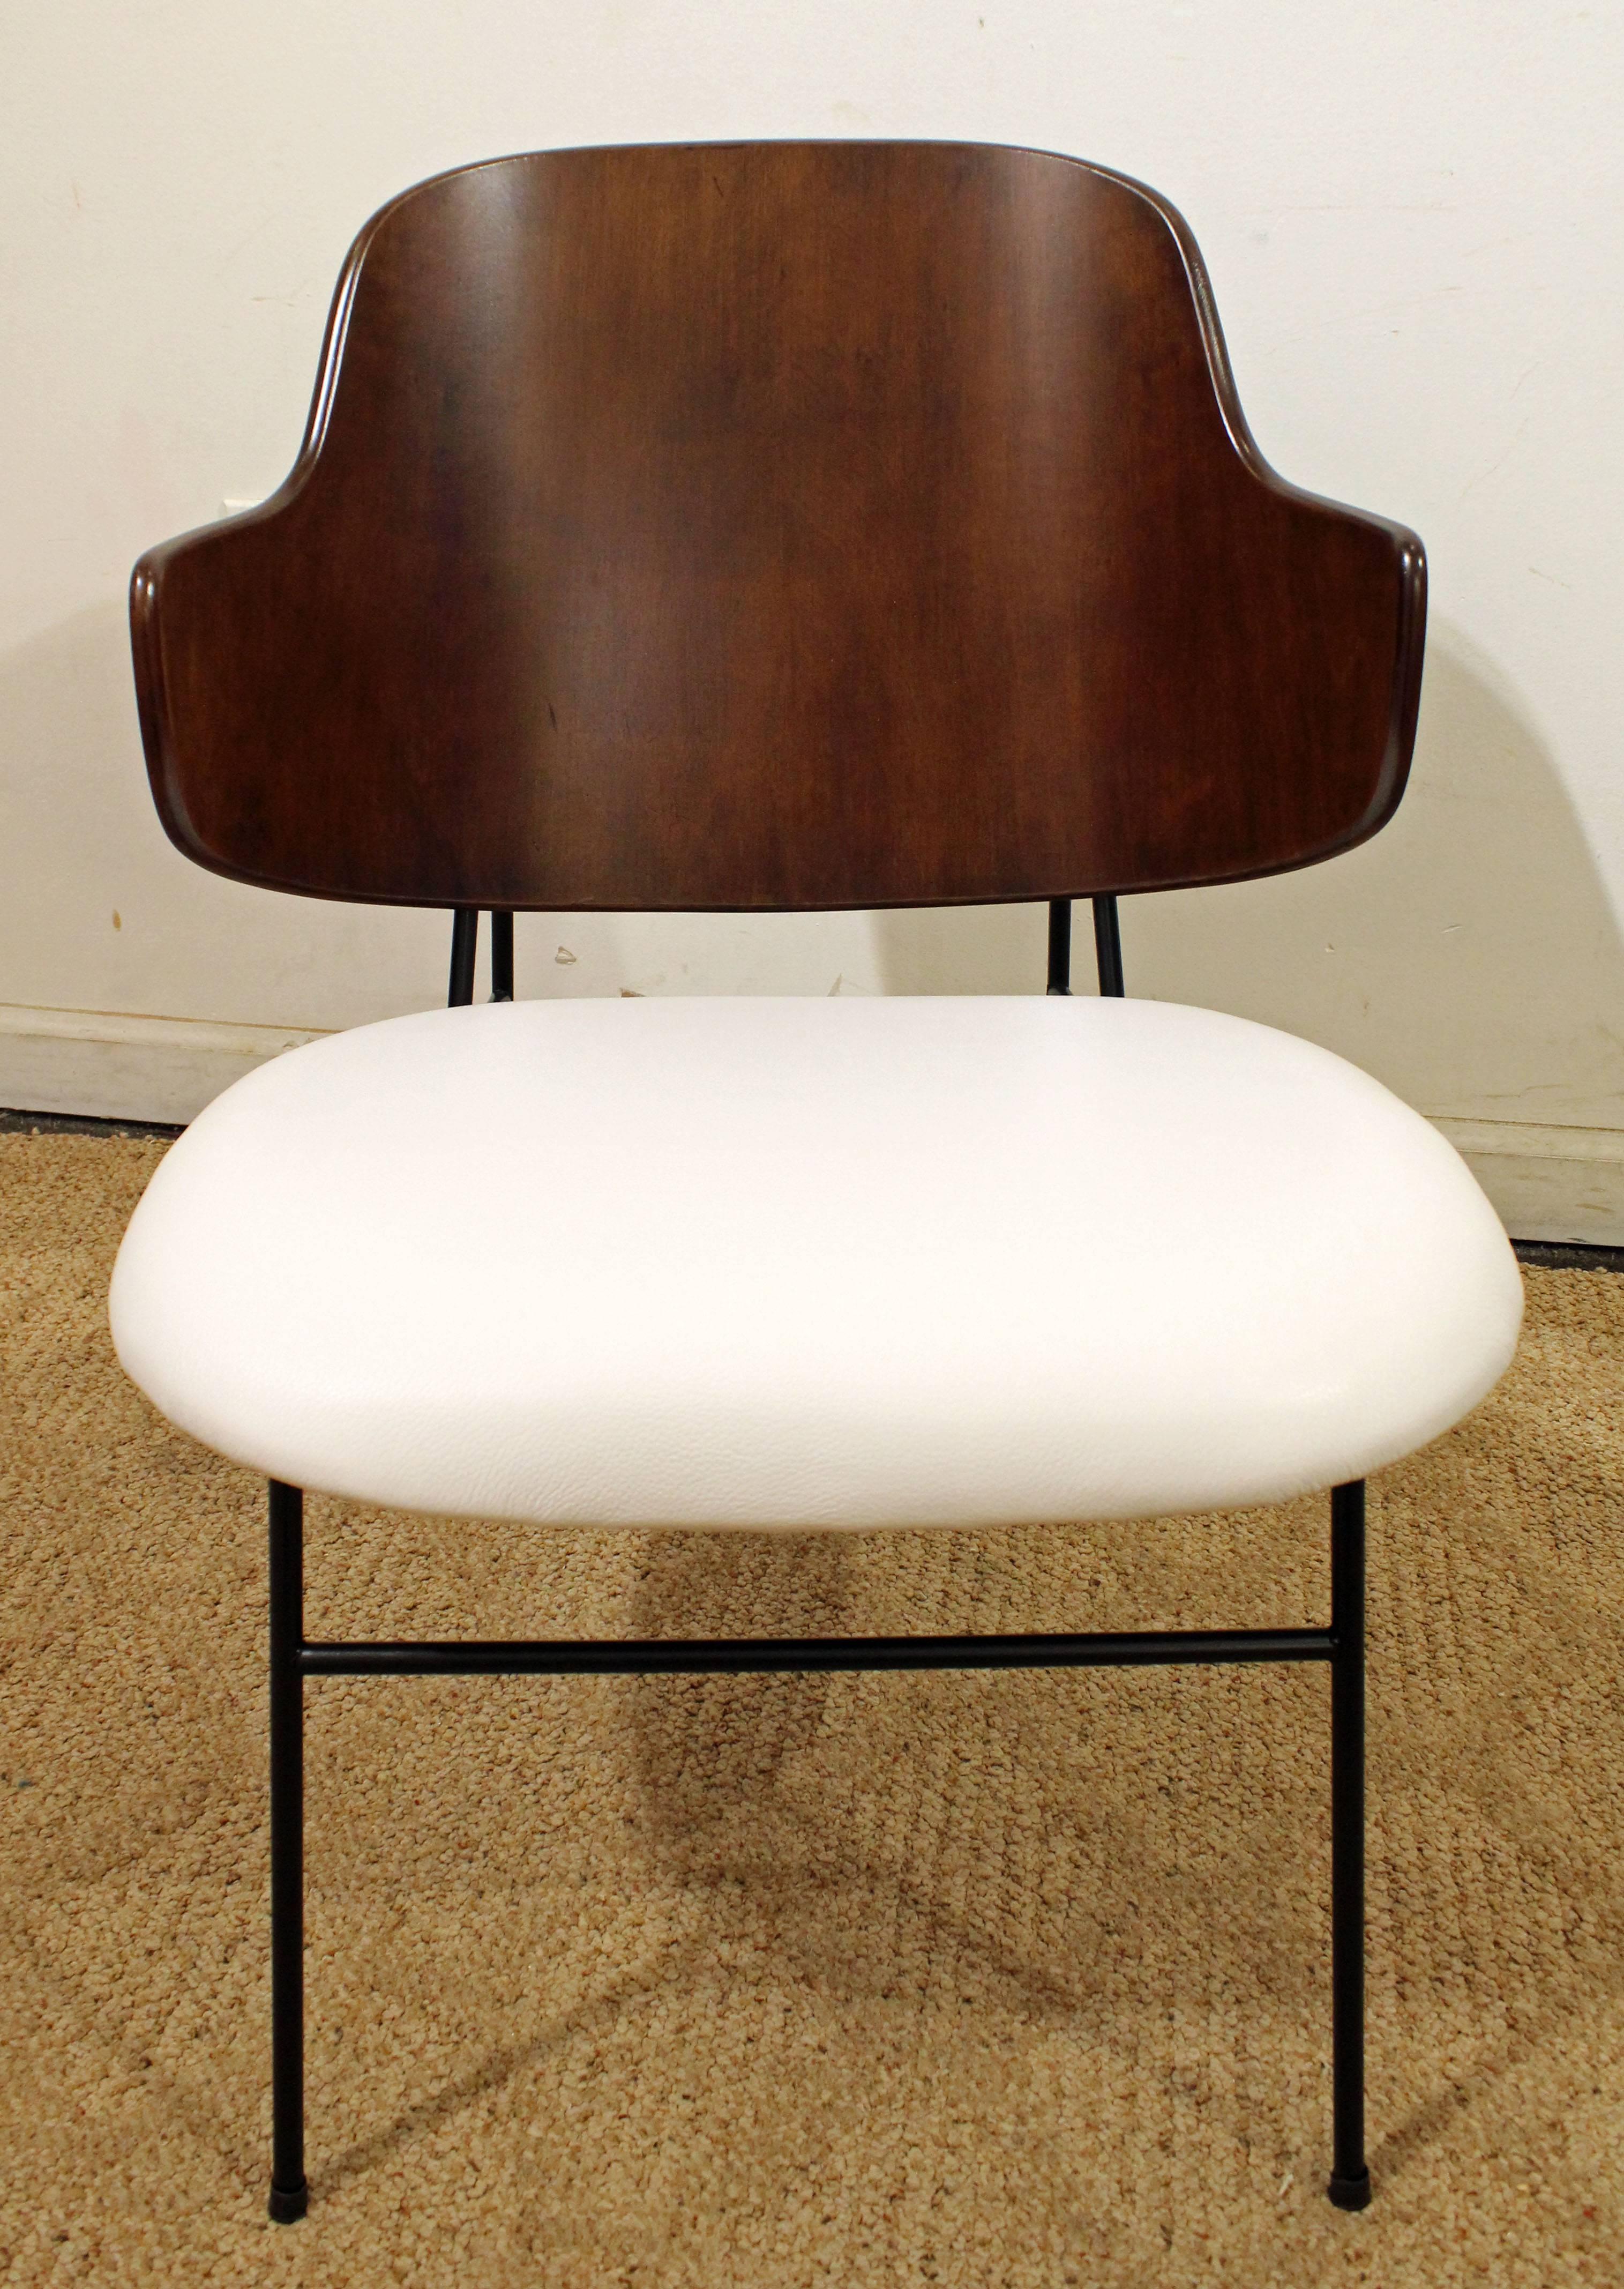 This is an original Penguin chair by IB Kofod Larsen. Has been completely restored with new leather and refinished walnut.